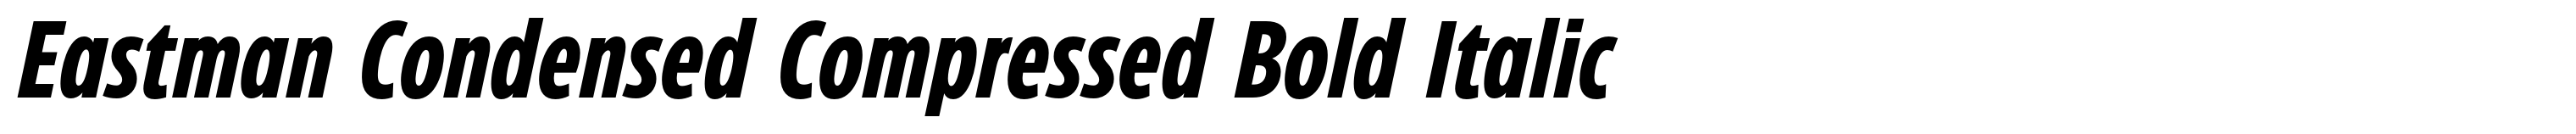 Eastman Condensed Compressed Bold Italic